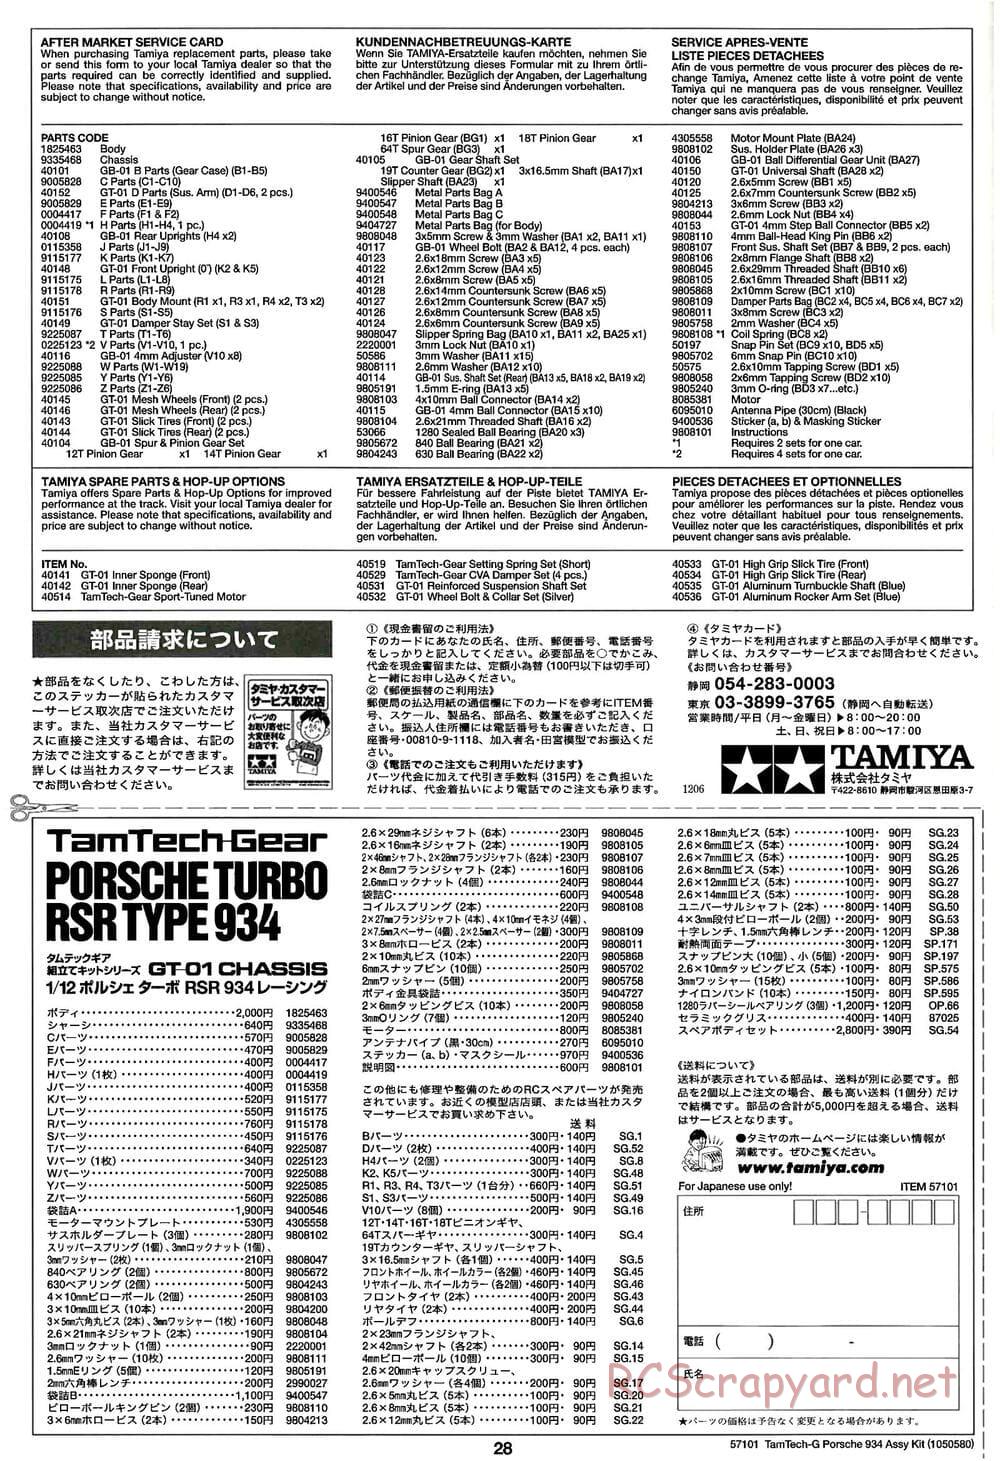 Tamiya - Porsche Turbo RSR - GT-01 Chassis - Manual - Page 28